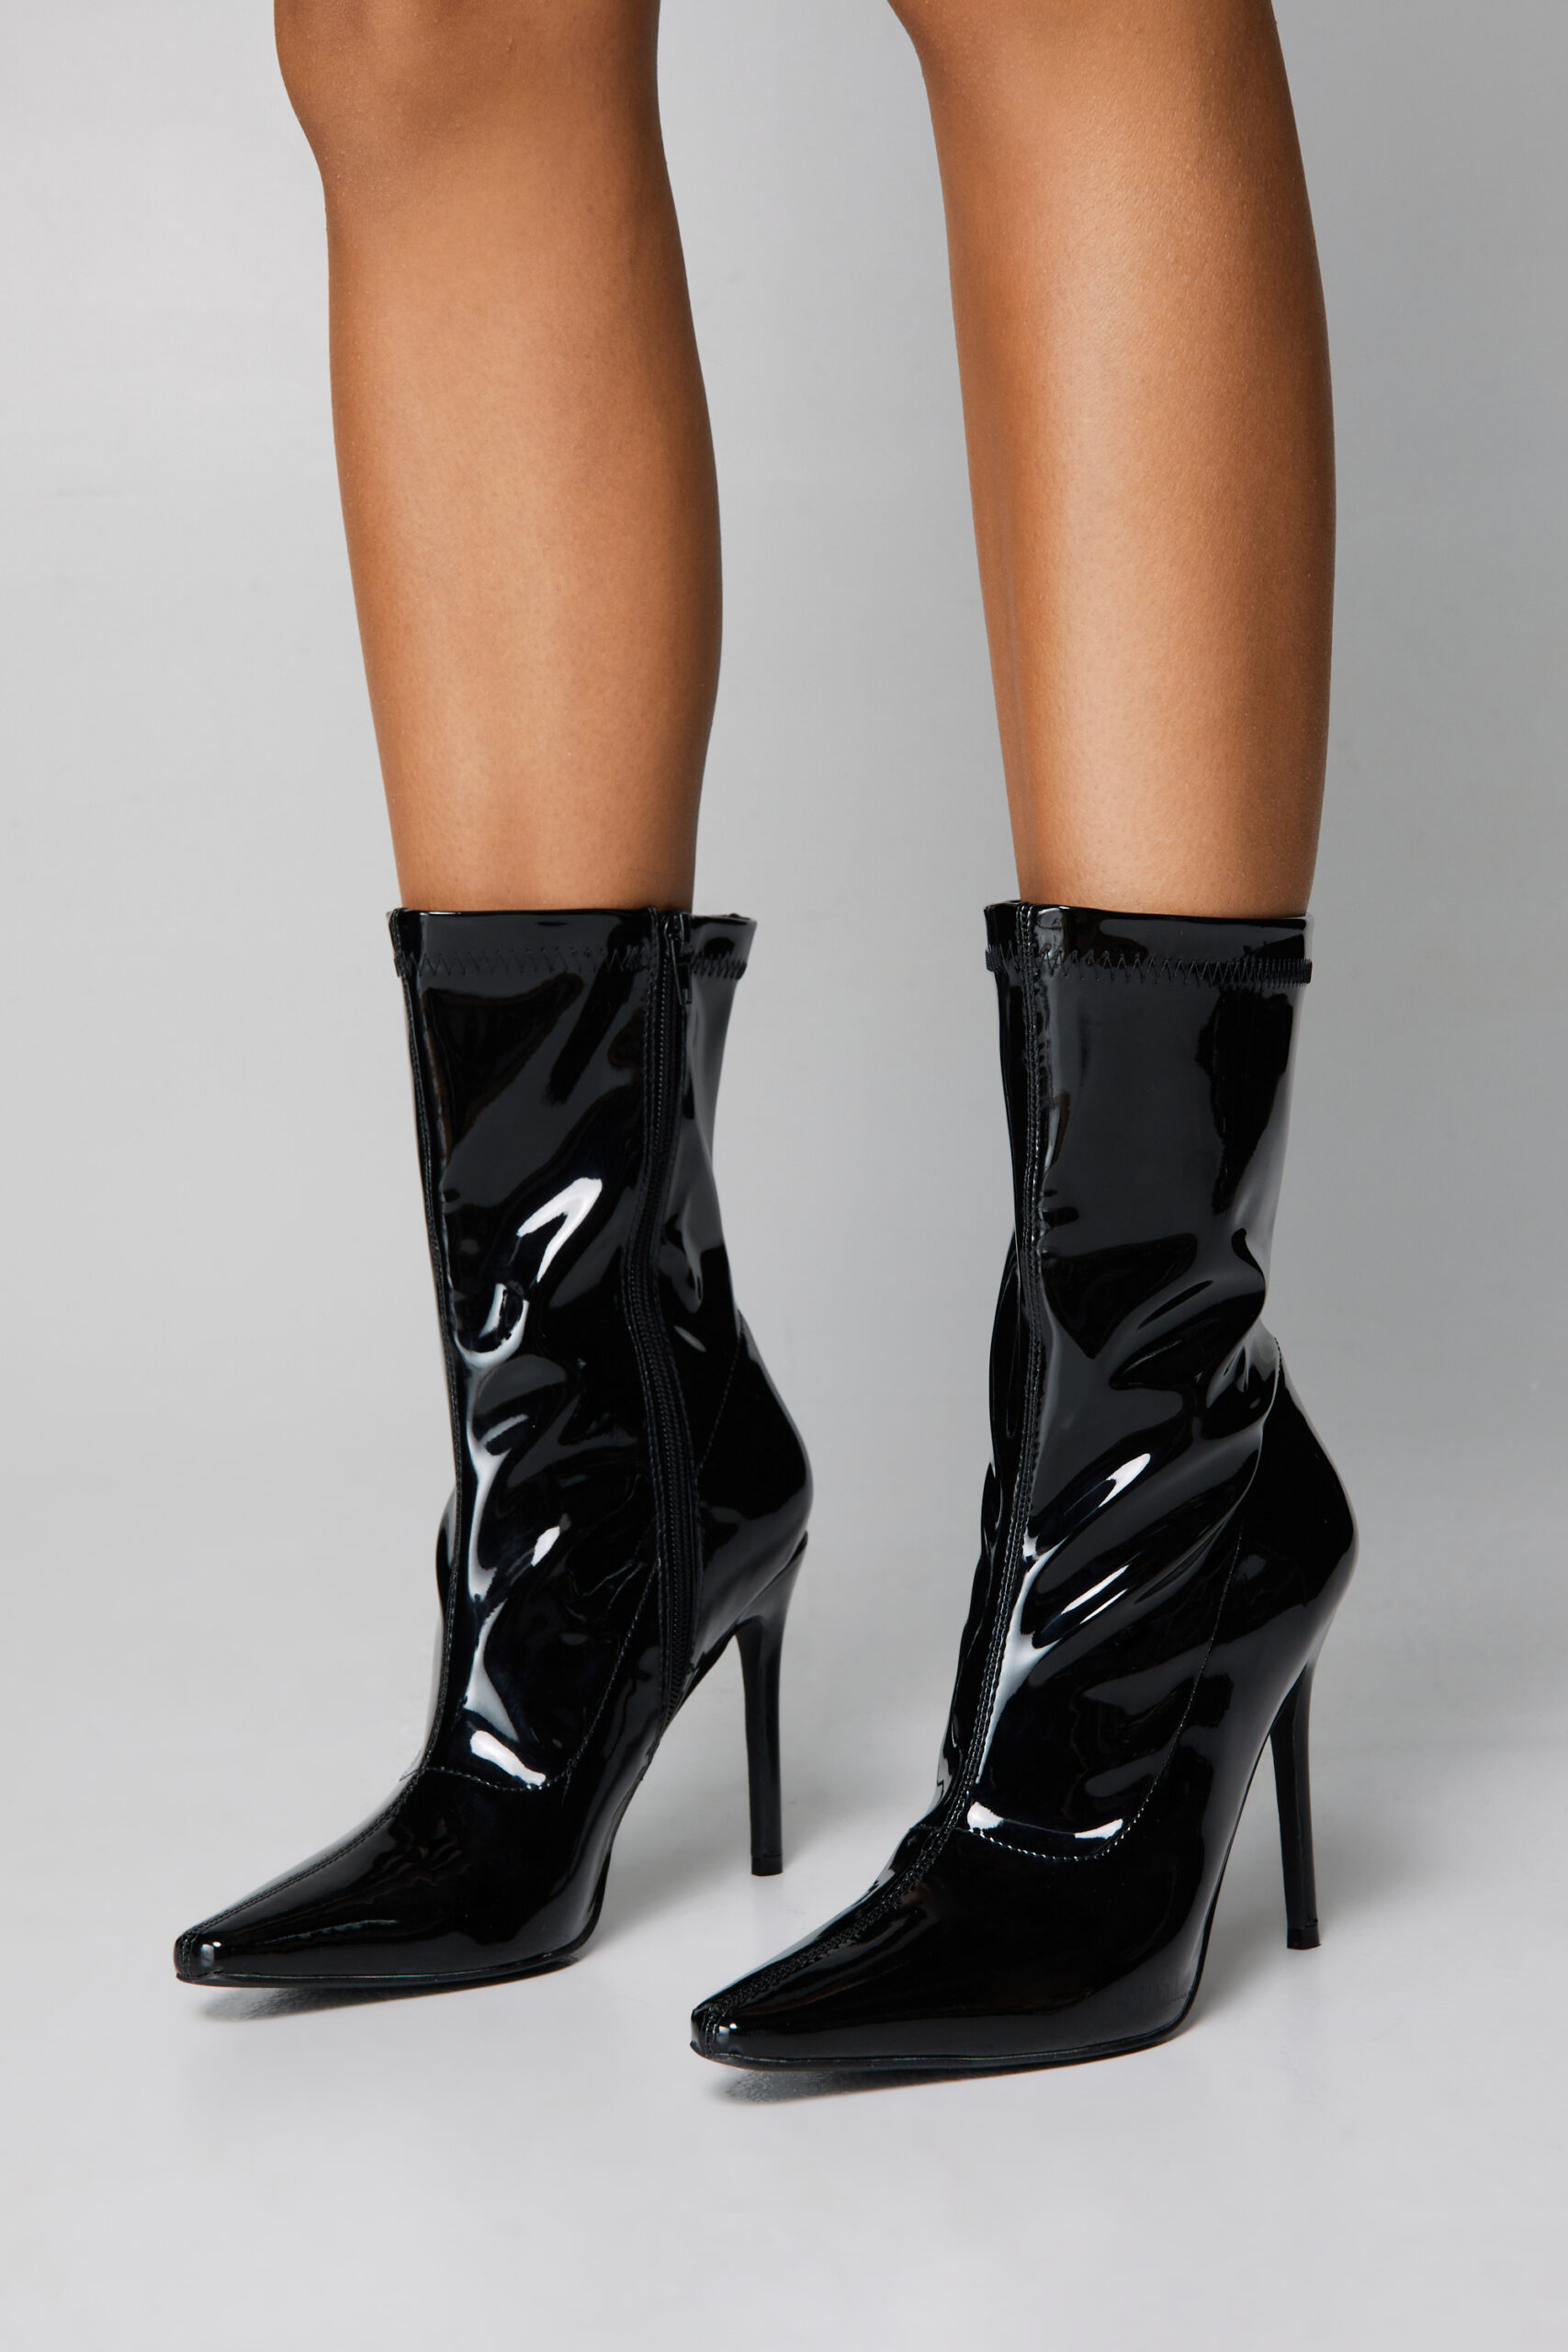 Patent Metallic Ankle Sock Boots